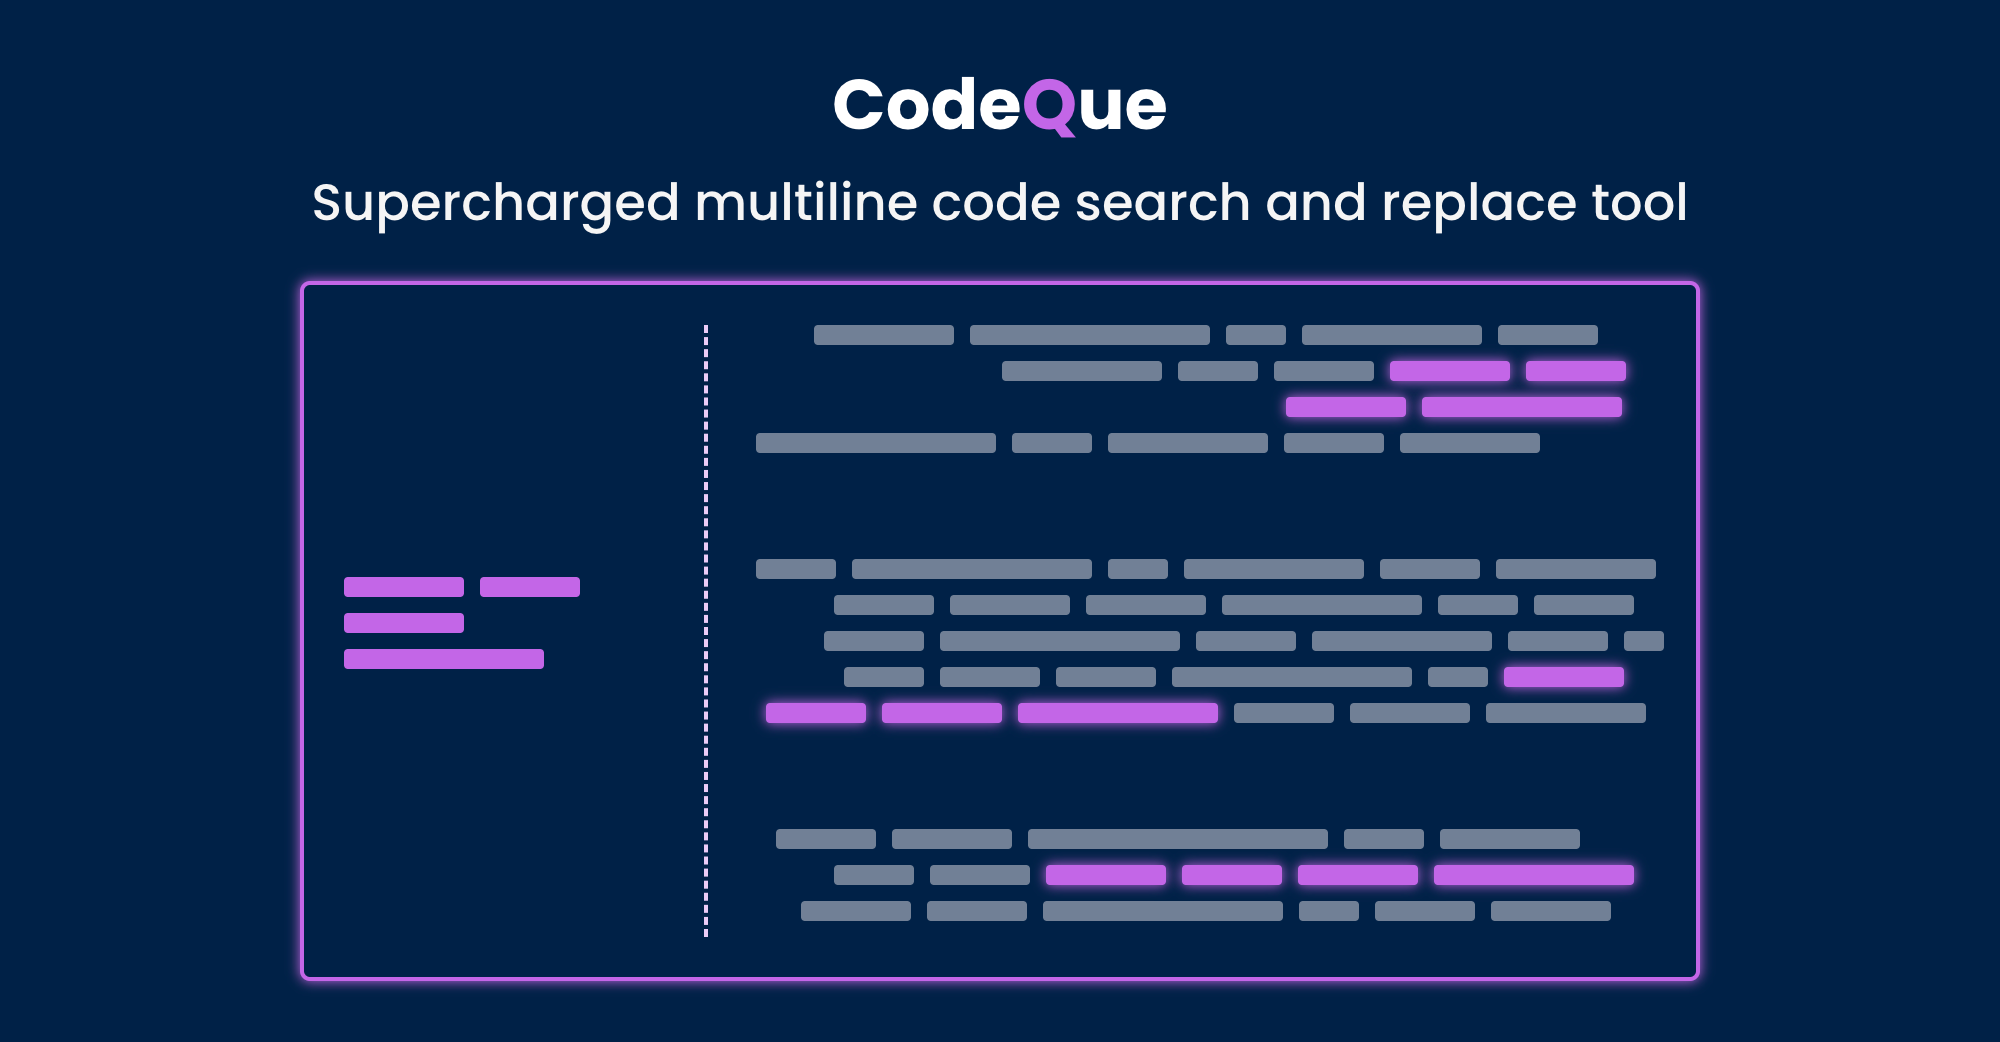 CodeQue - supercharged multiline code search and replace tool